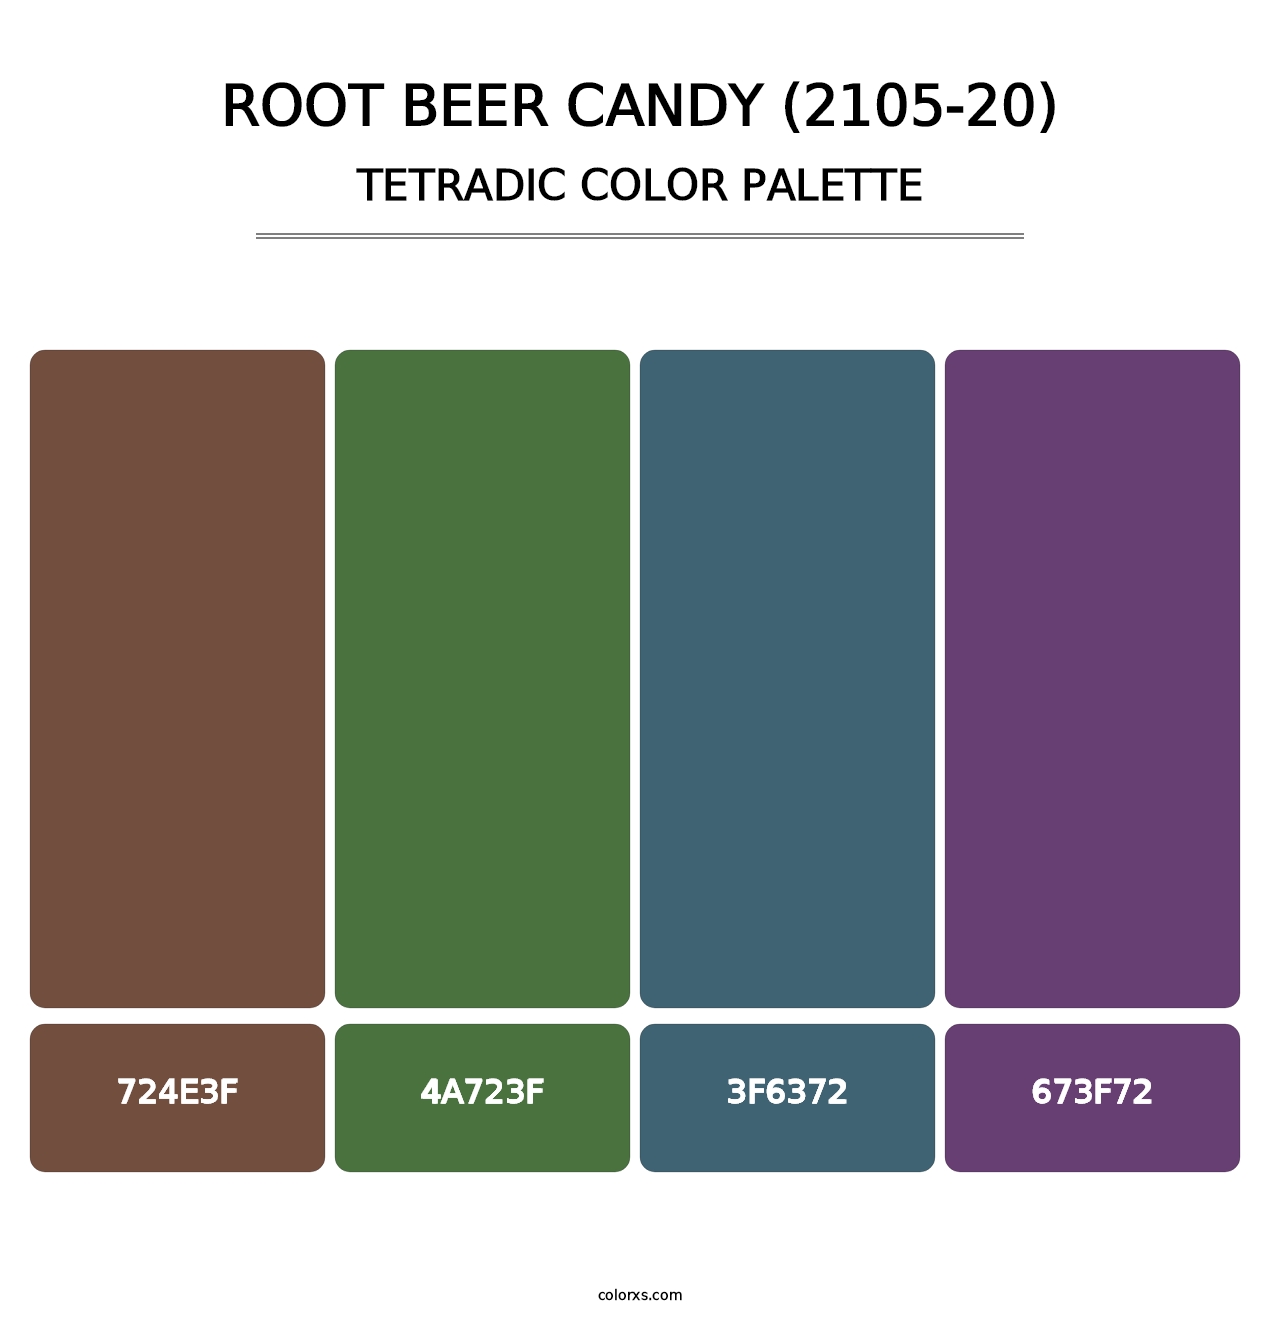 Root Beer Candy (2105-20) - Tetradic Color Palette